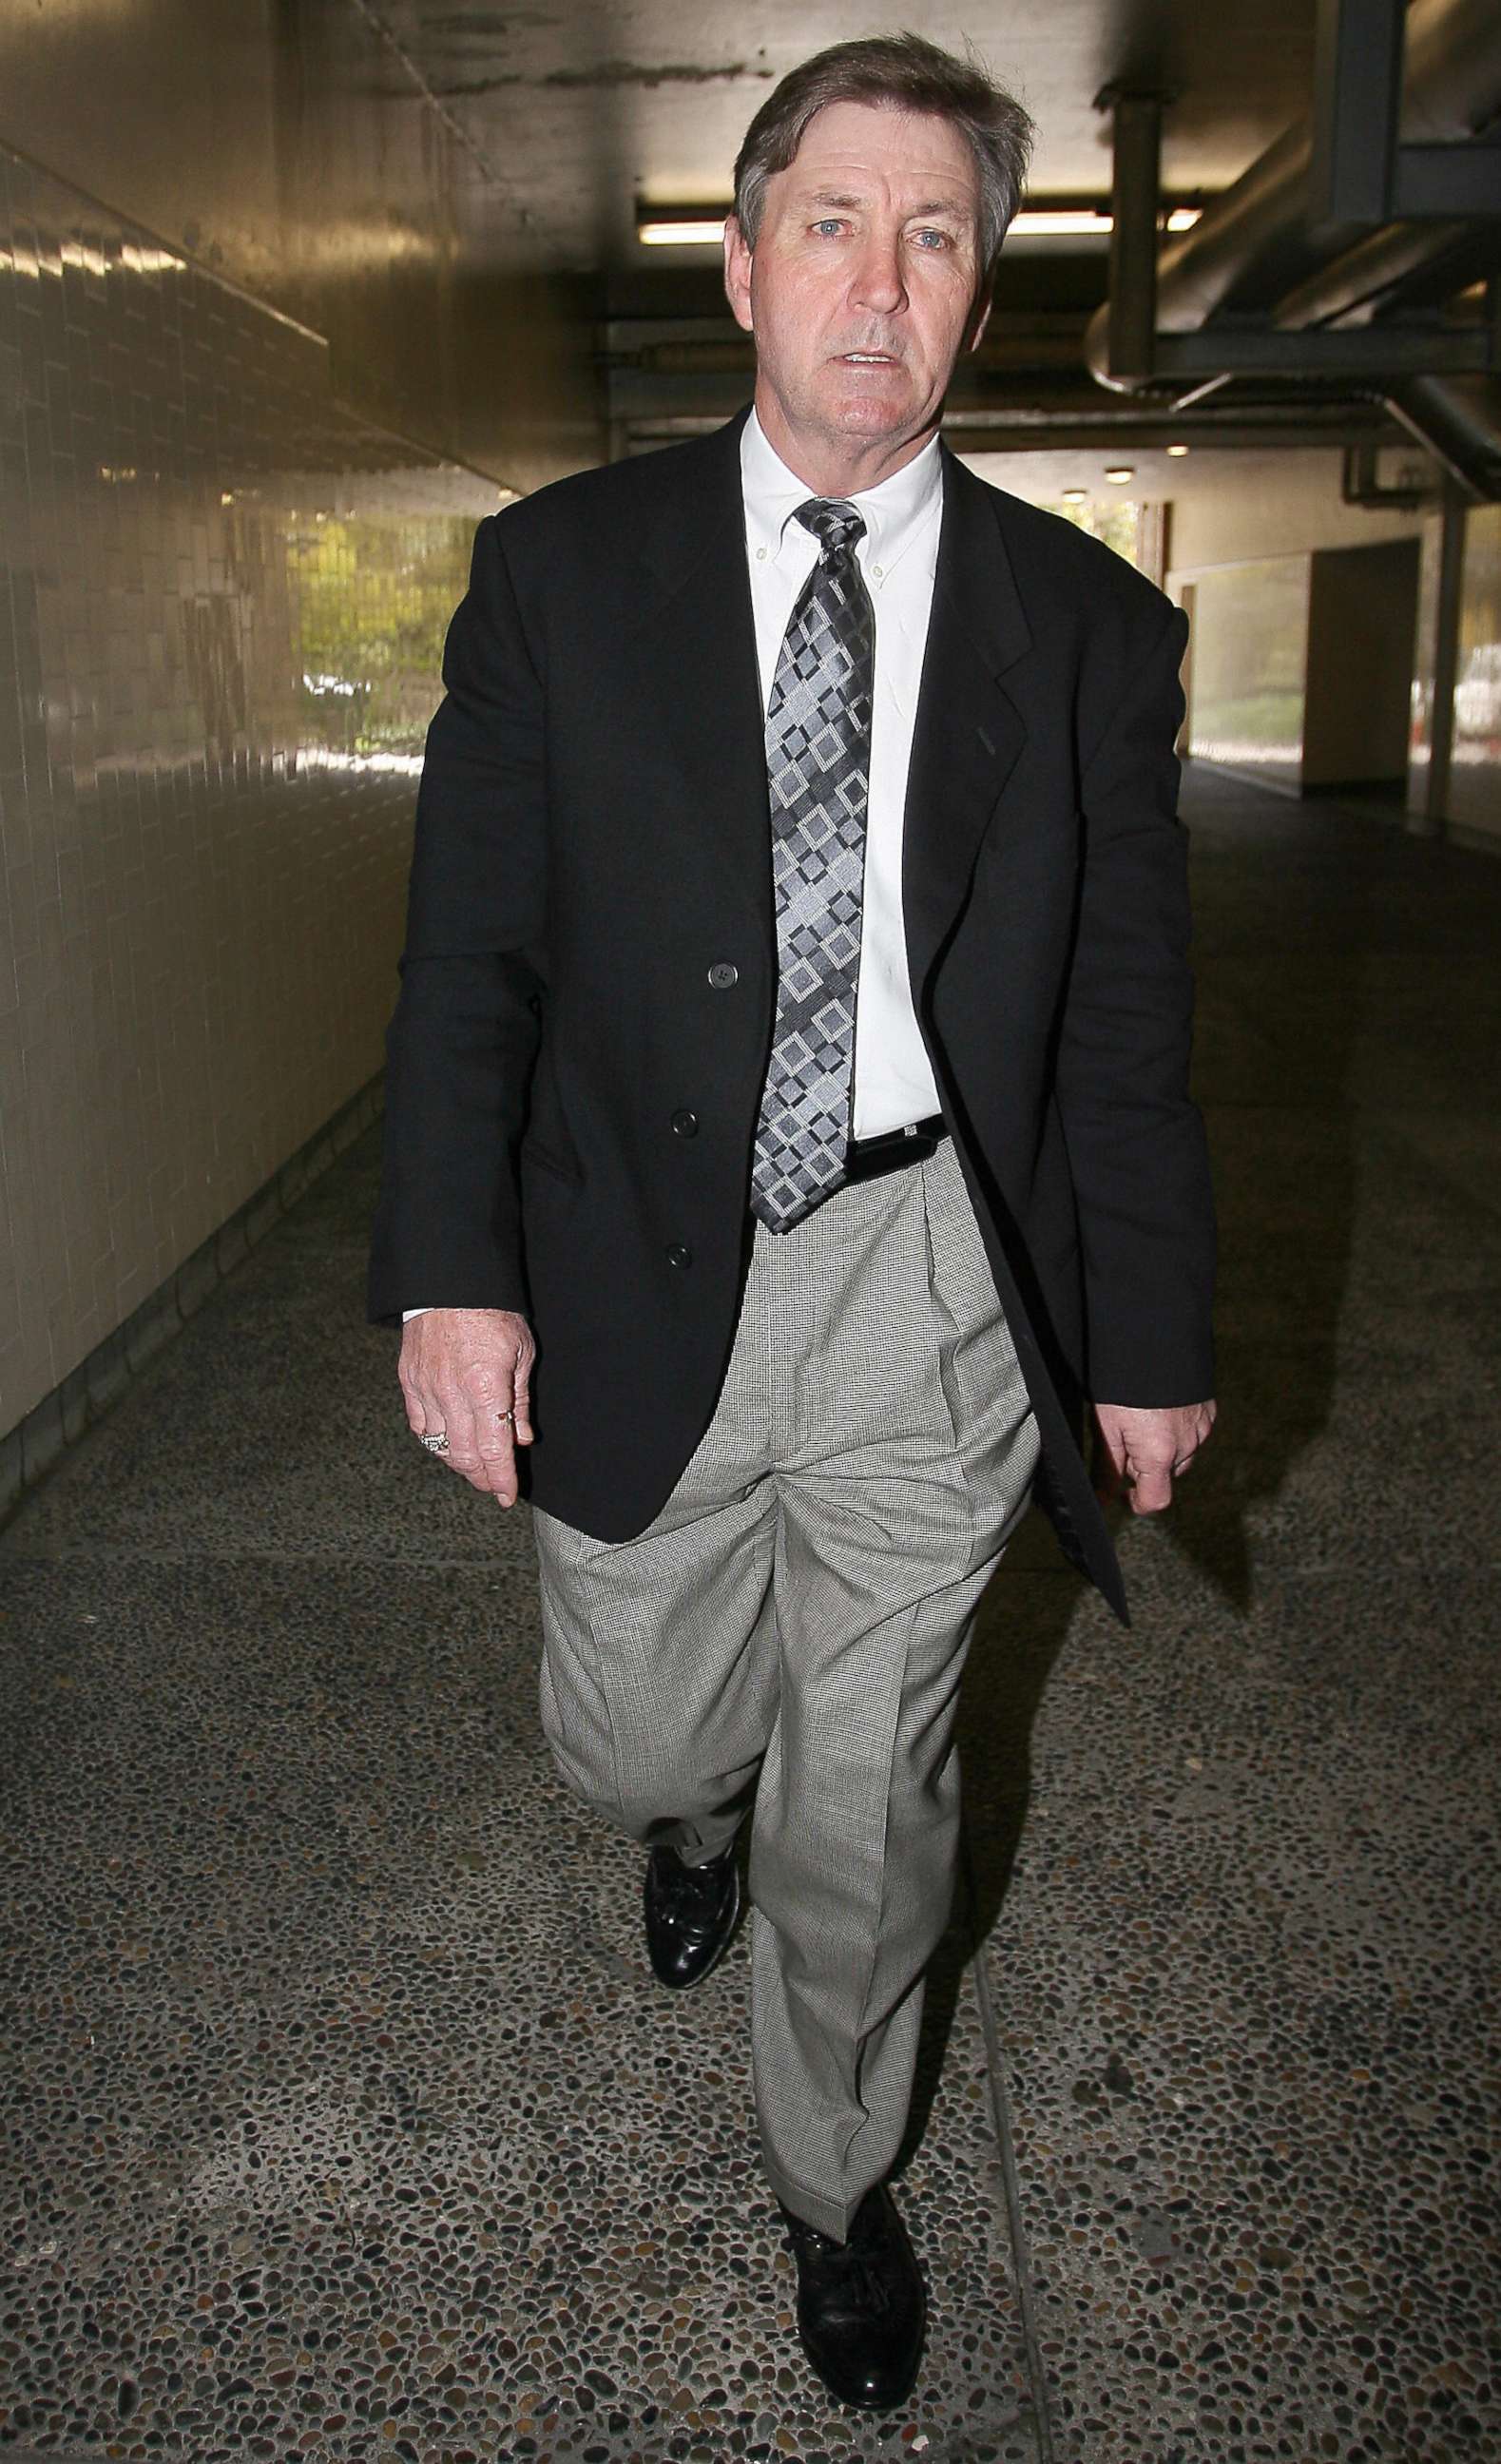 PHOTO: Britney Spears' father, Jamie Spears leaves the Los Angeles County Superior courthouse on March 10, 2008.